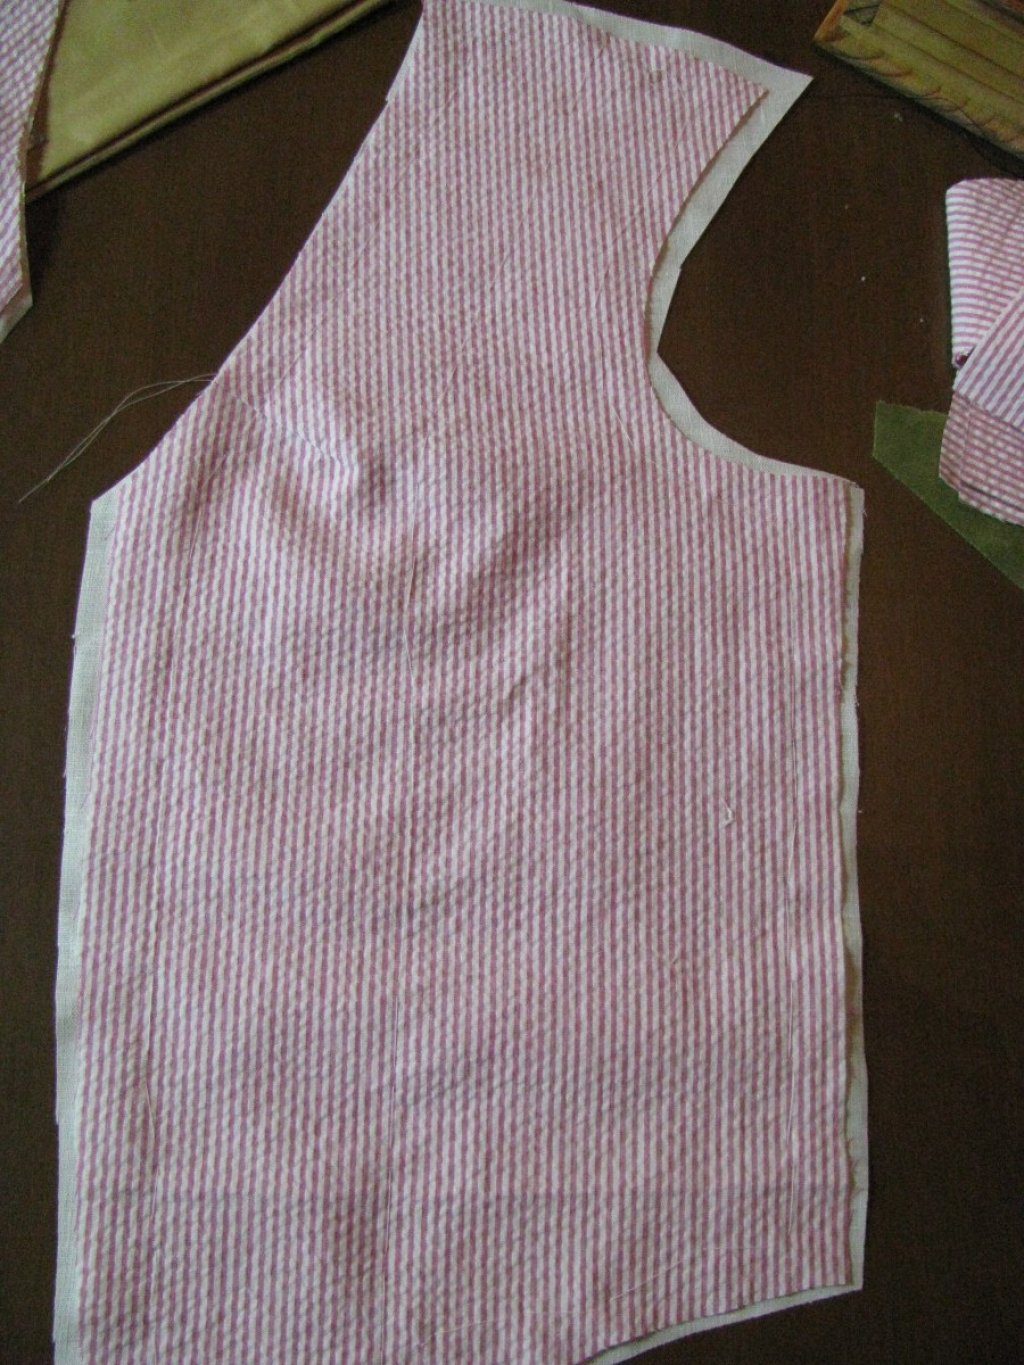 The waistcoat forepart attached to the canvas.